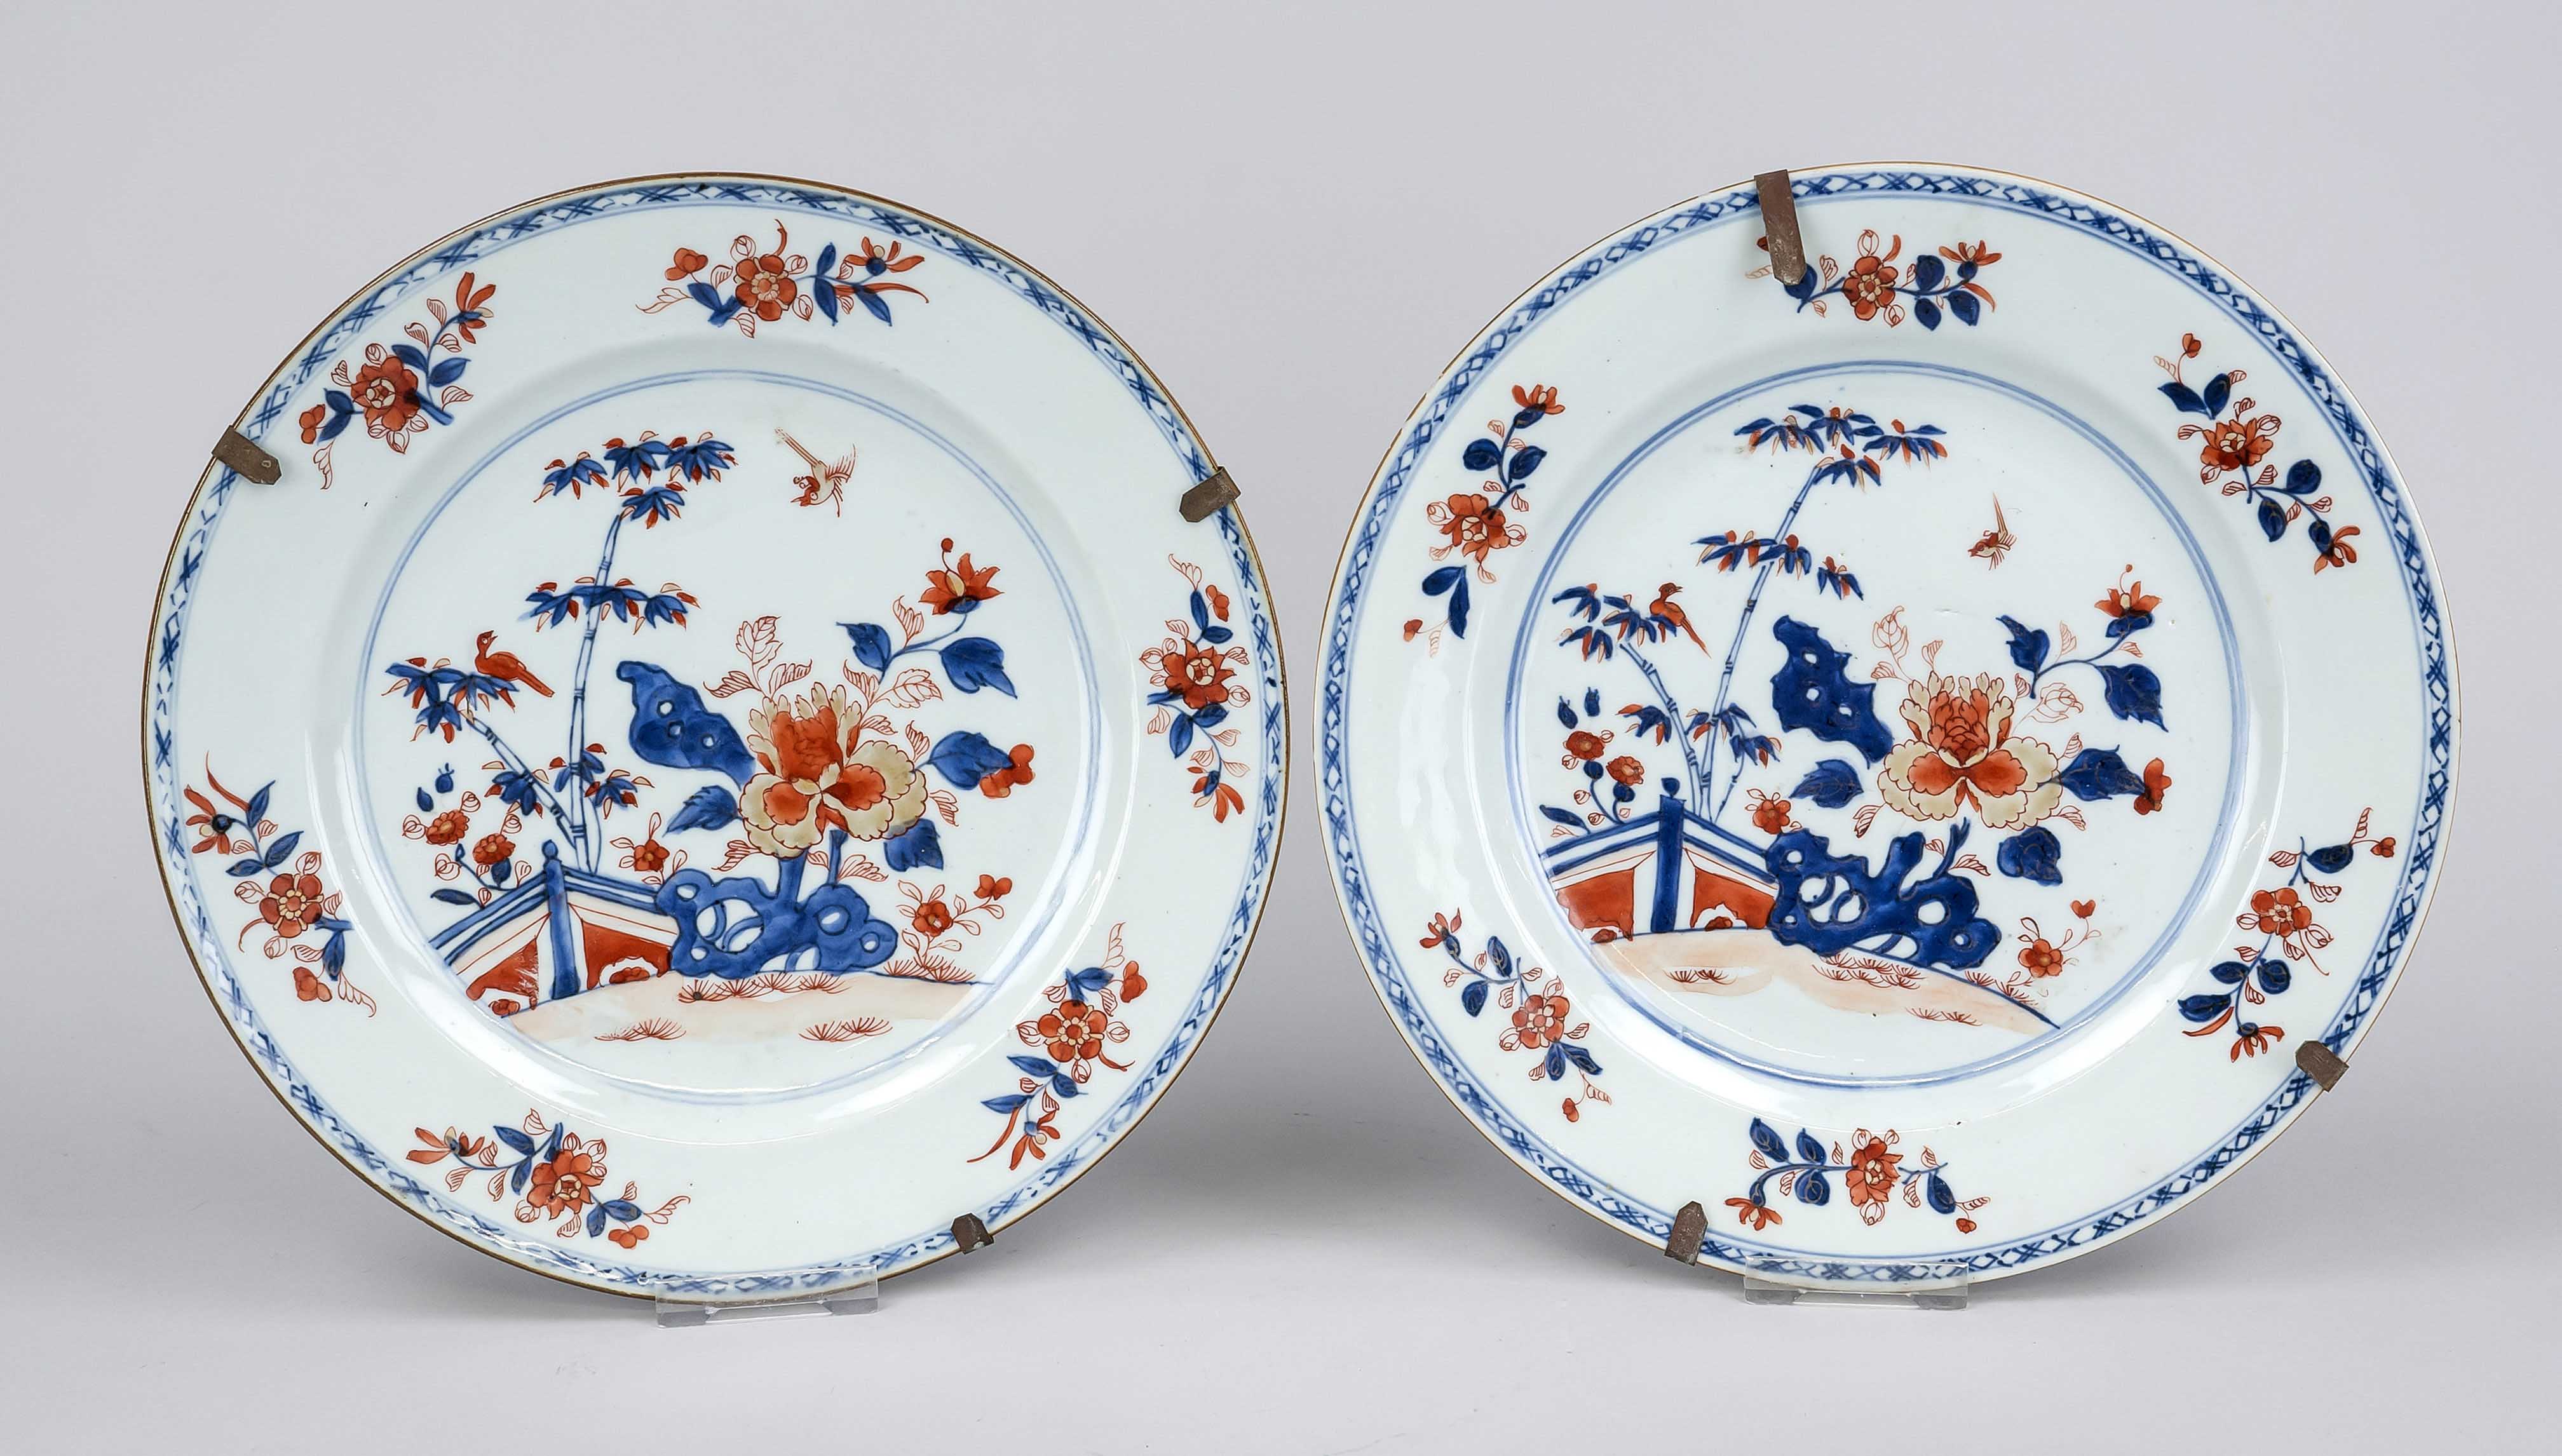 Pair of Imari plates, China 18th century (Qing). Decorated under and on the glaze in cobalt blue,